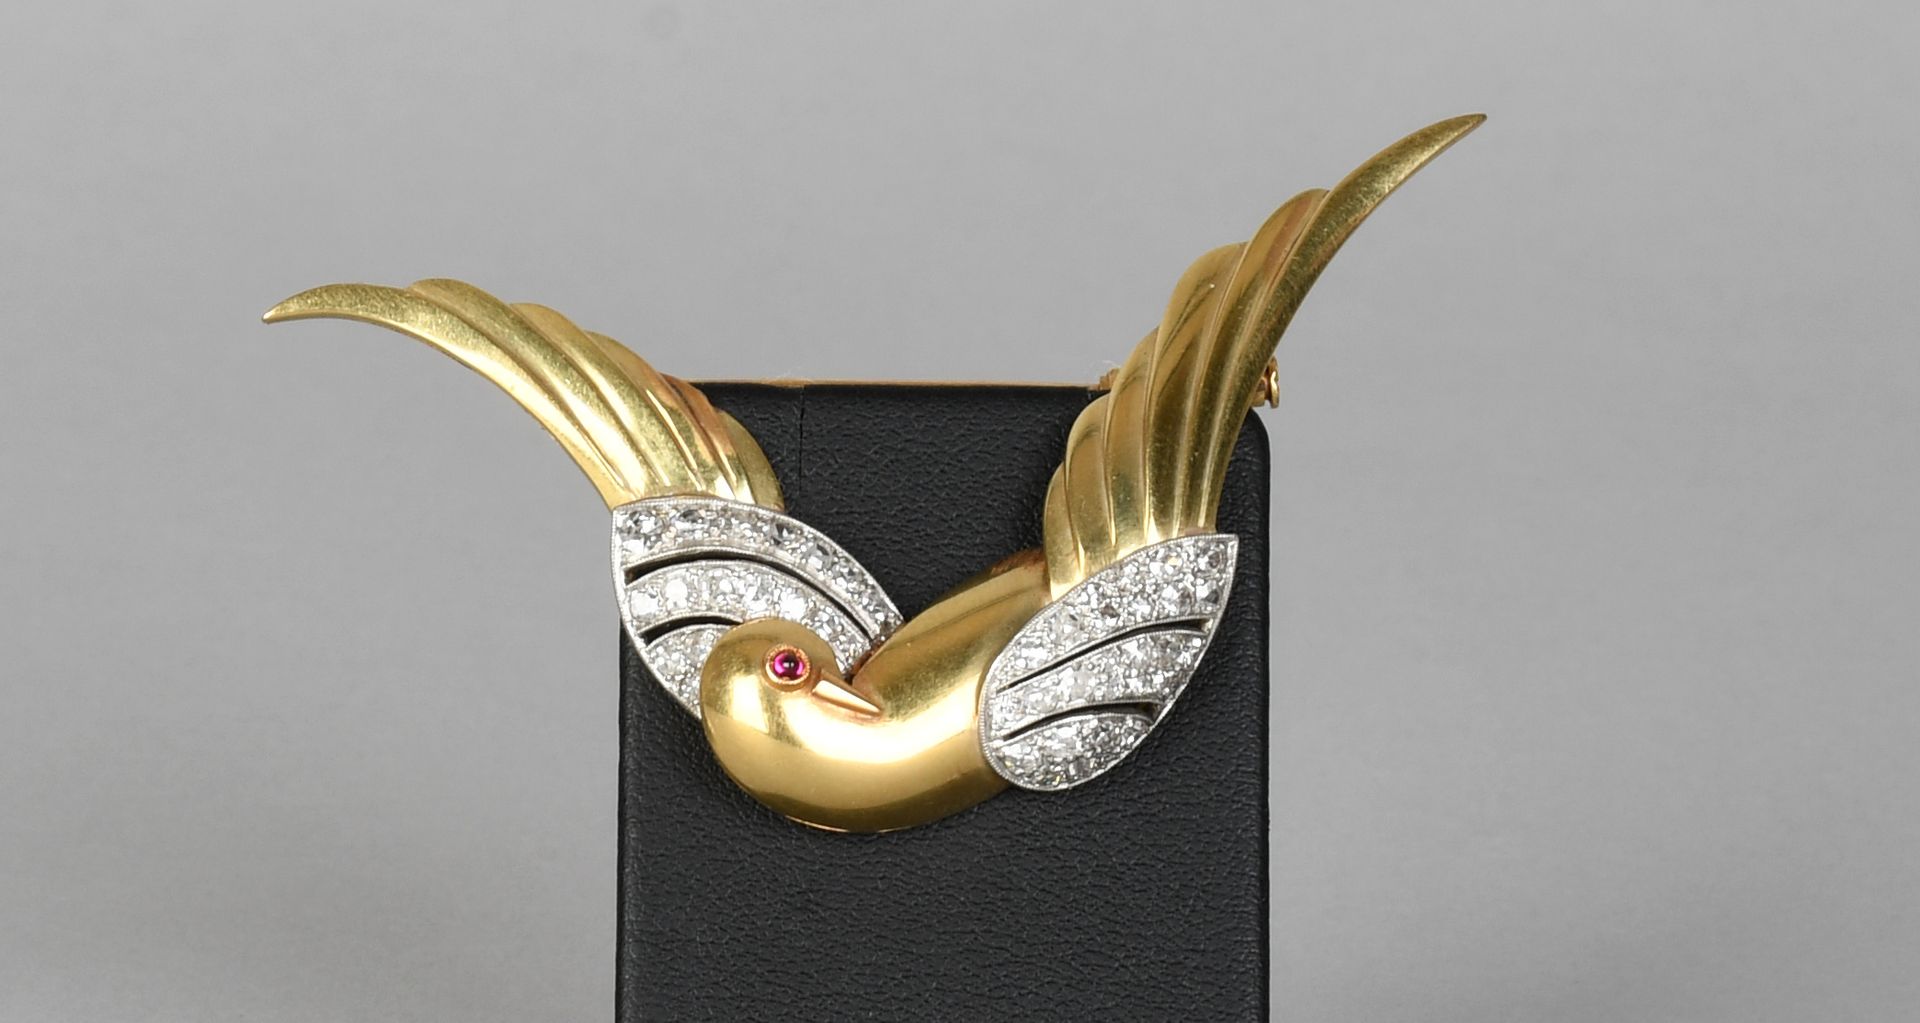 Null Jewel

Brooch in the shape of a bird, in yellow and white gold set with dia&hellip;